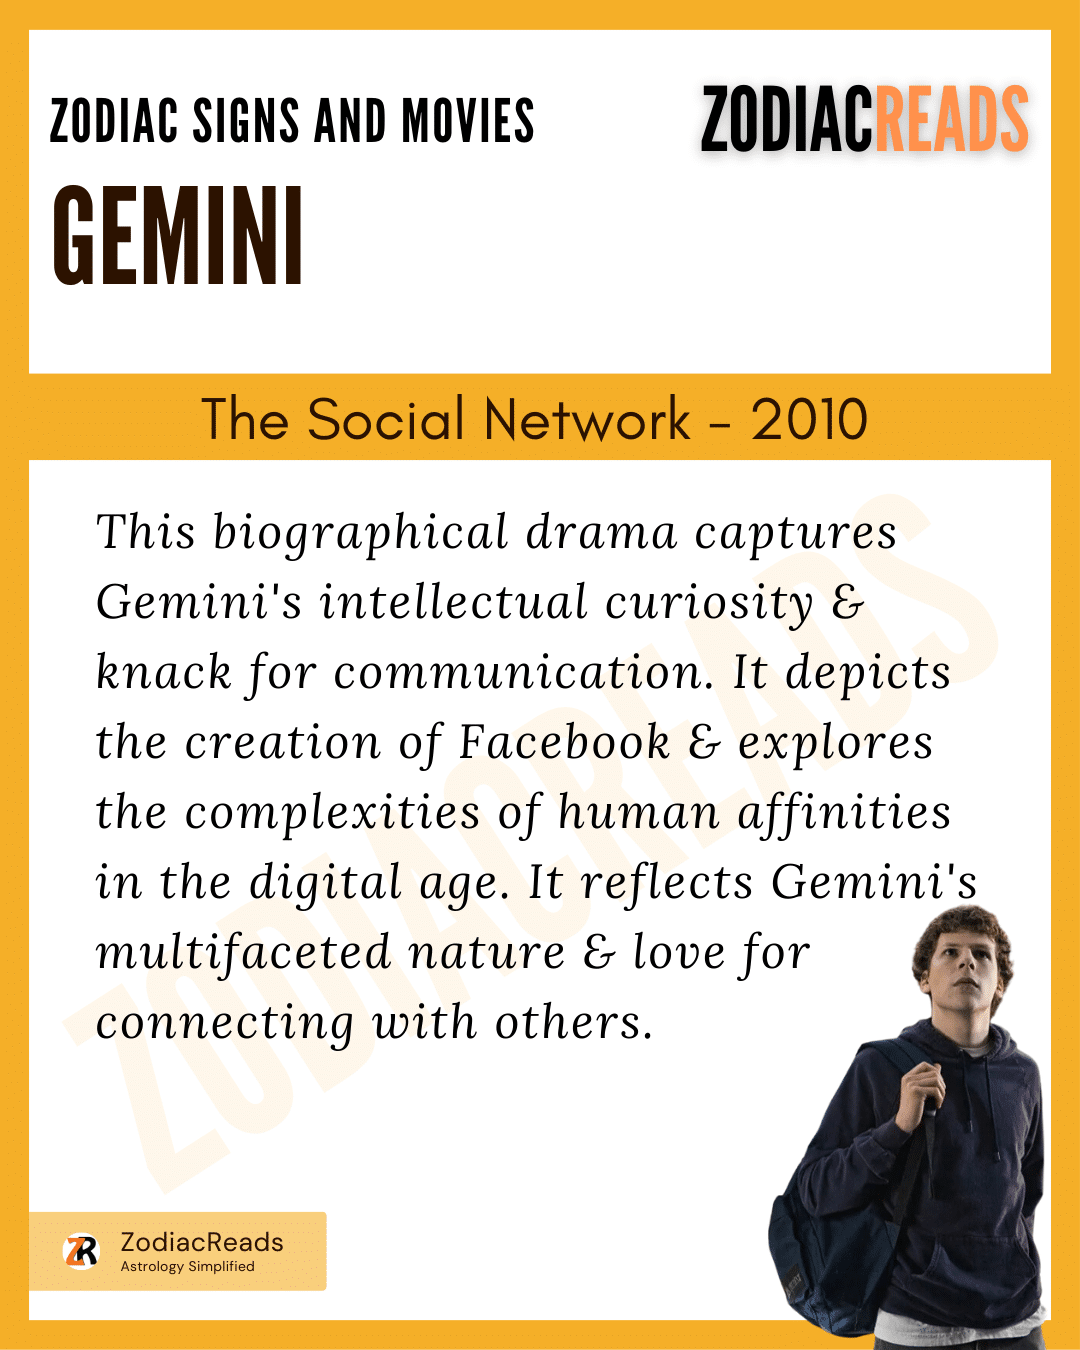 Gemini The Social Network Zodiac Signs and Movies